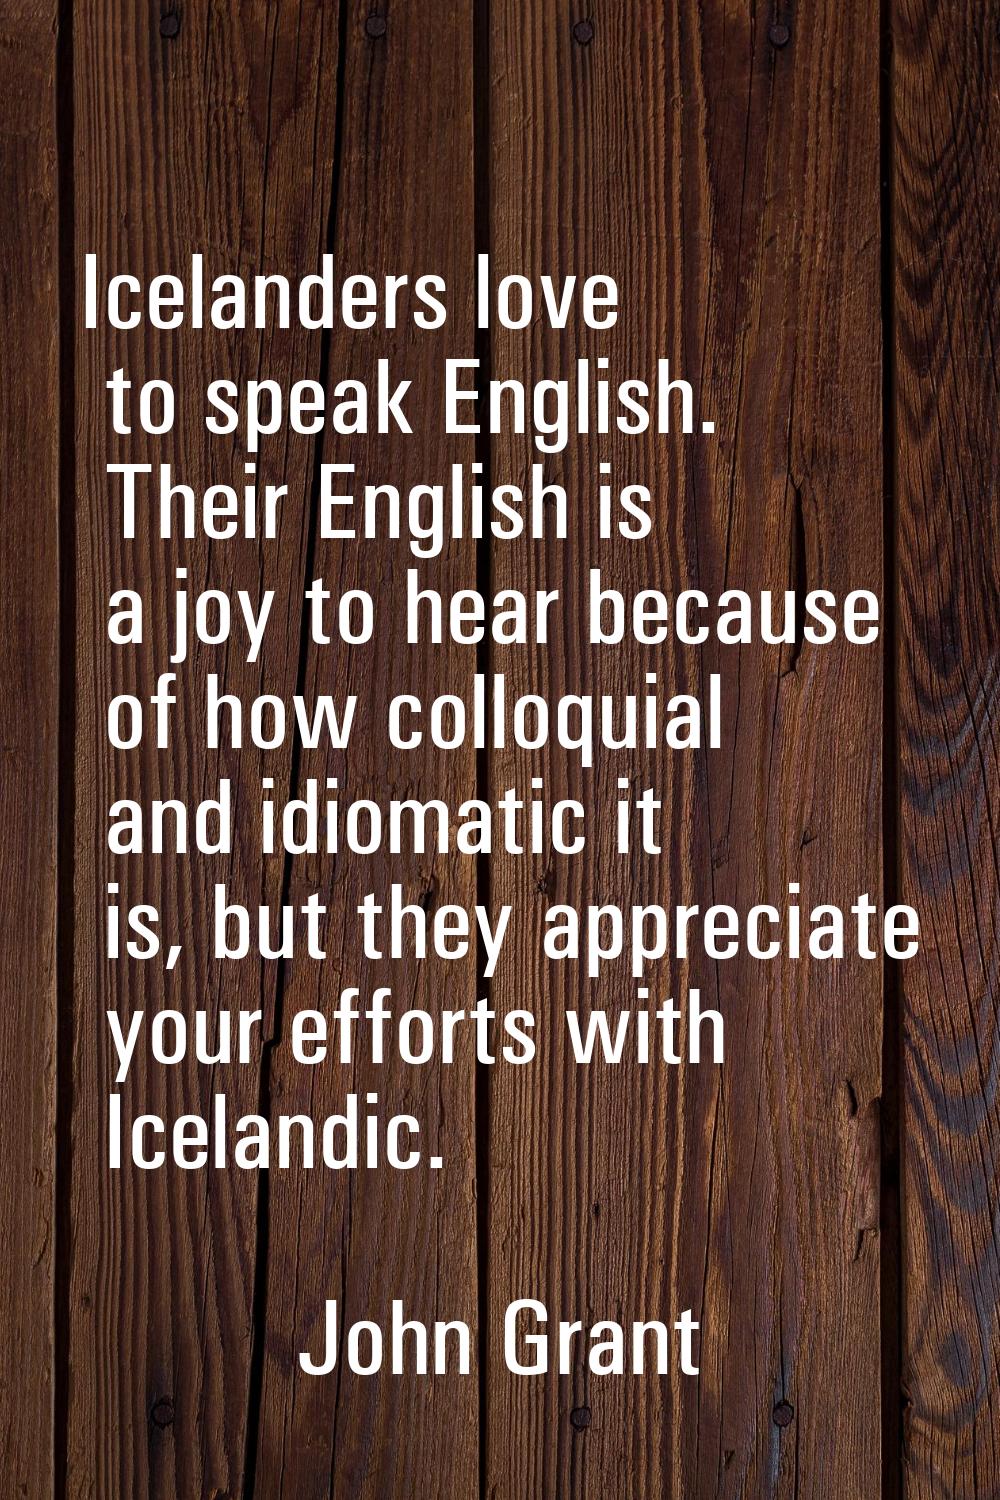 Icelanders love to speak English. Their English is a joy to hear because of how colloquial and idio